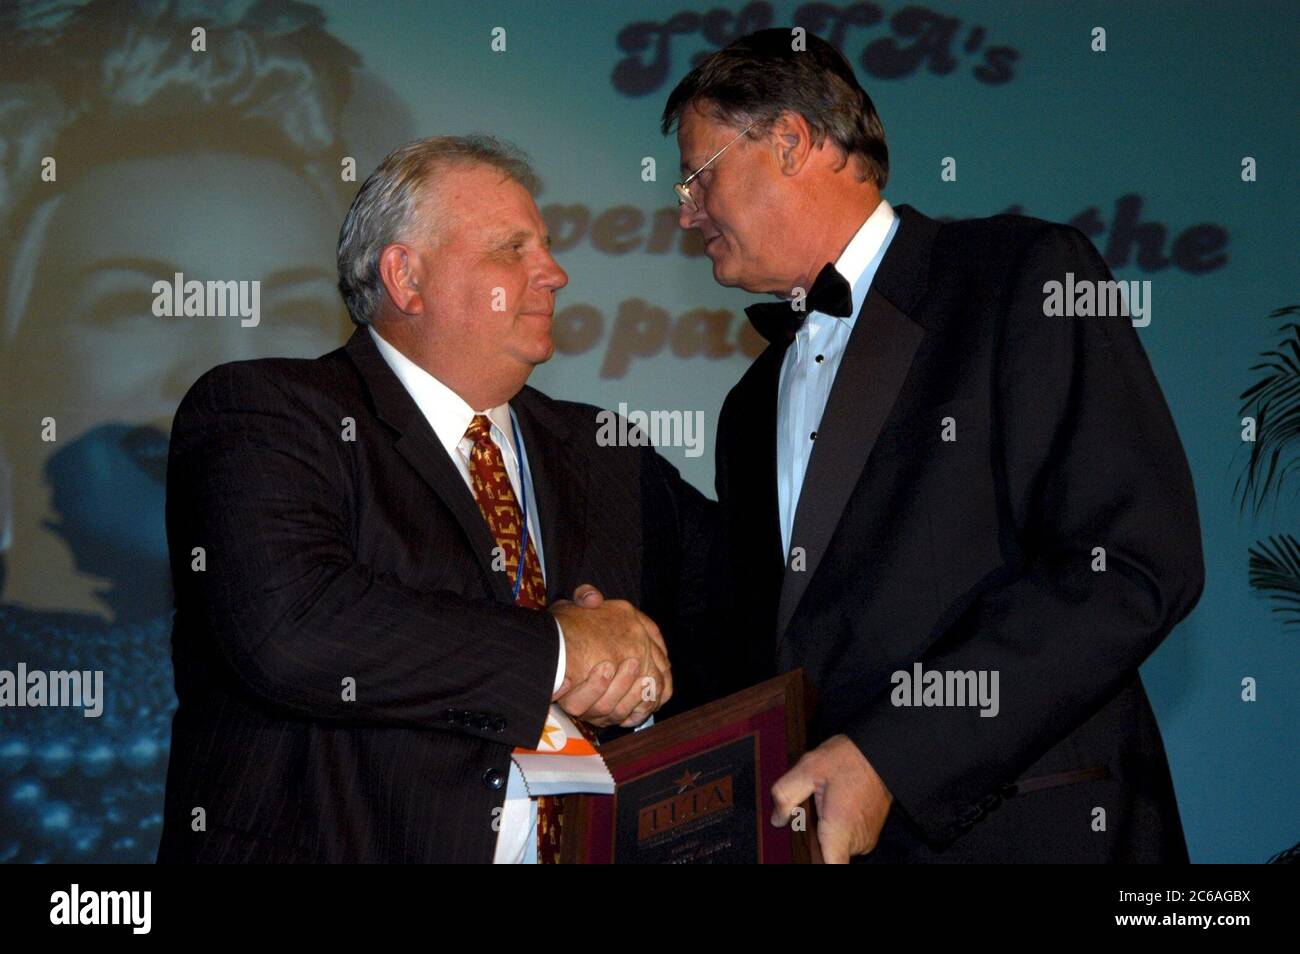 Corpus Christi Texas USA, June, 2004: White male wearing tuxedo presents award to white male during formal dinner at professional association convention.  ©Bob Daemmrich Stock Photo